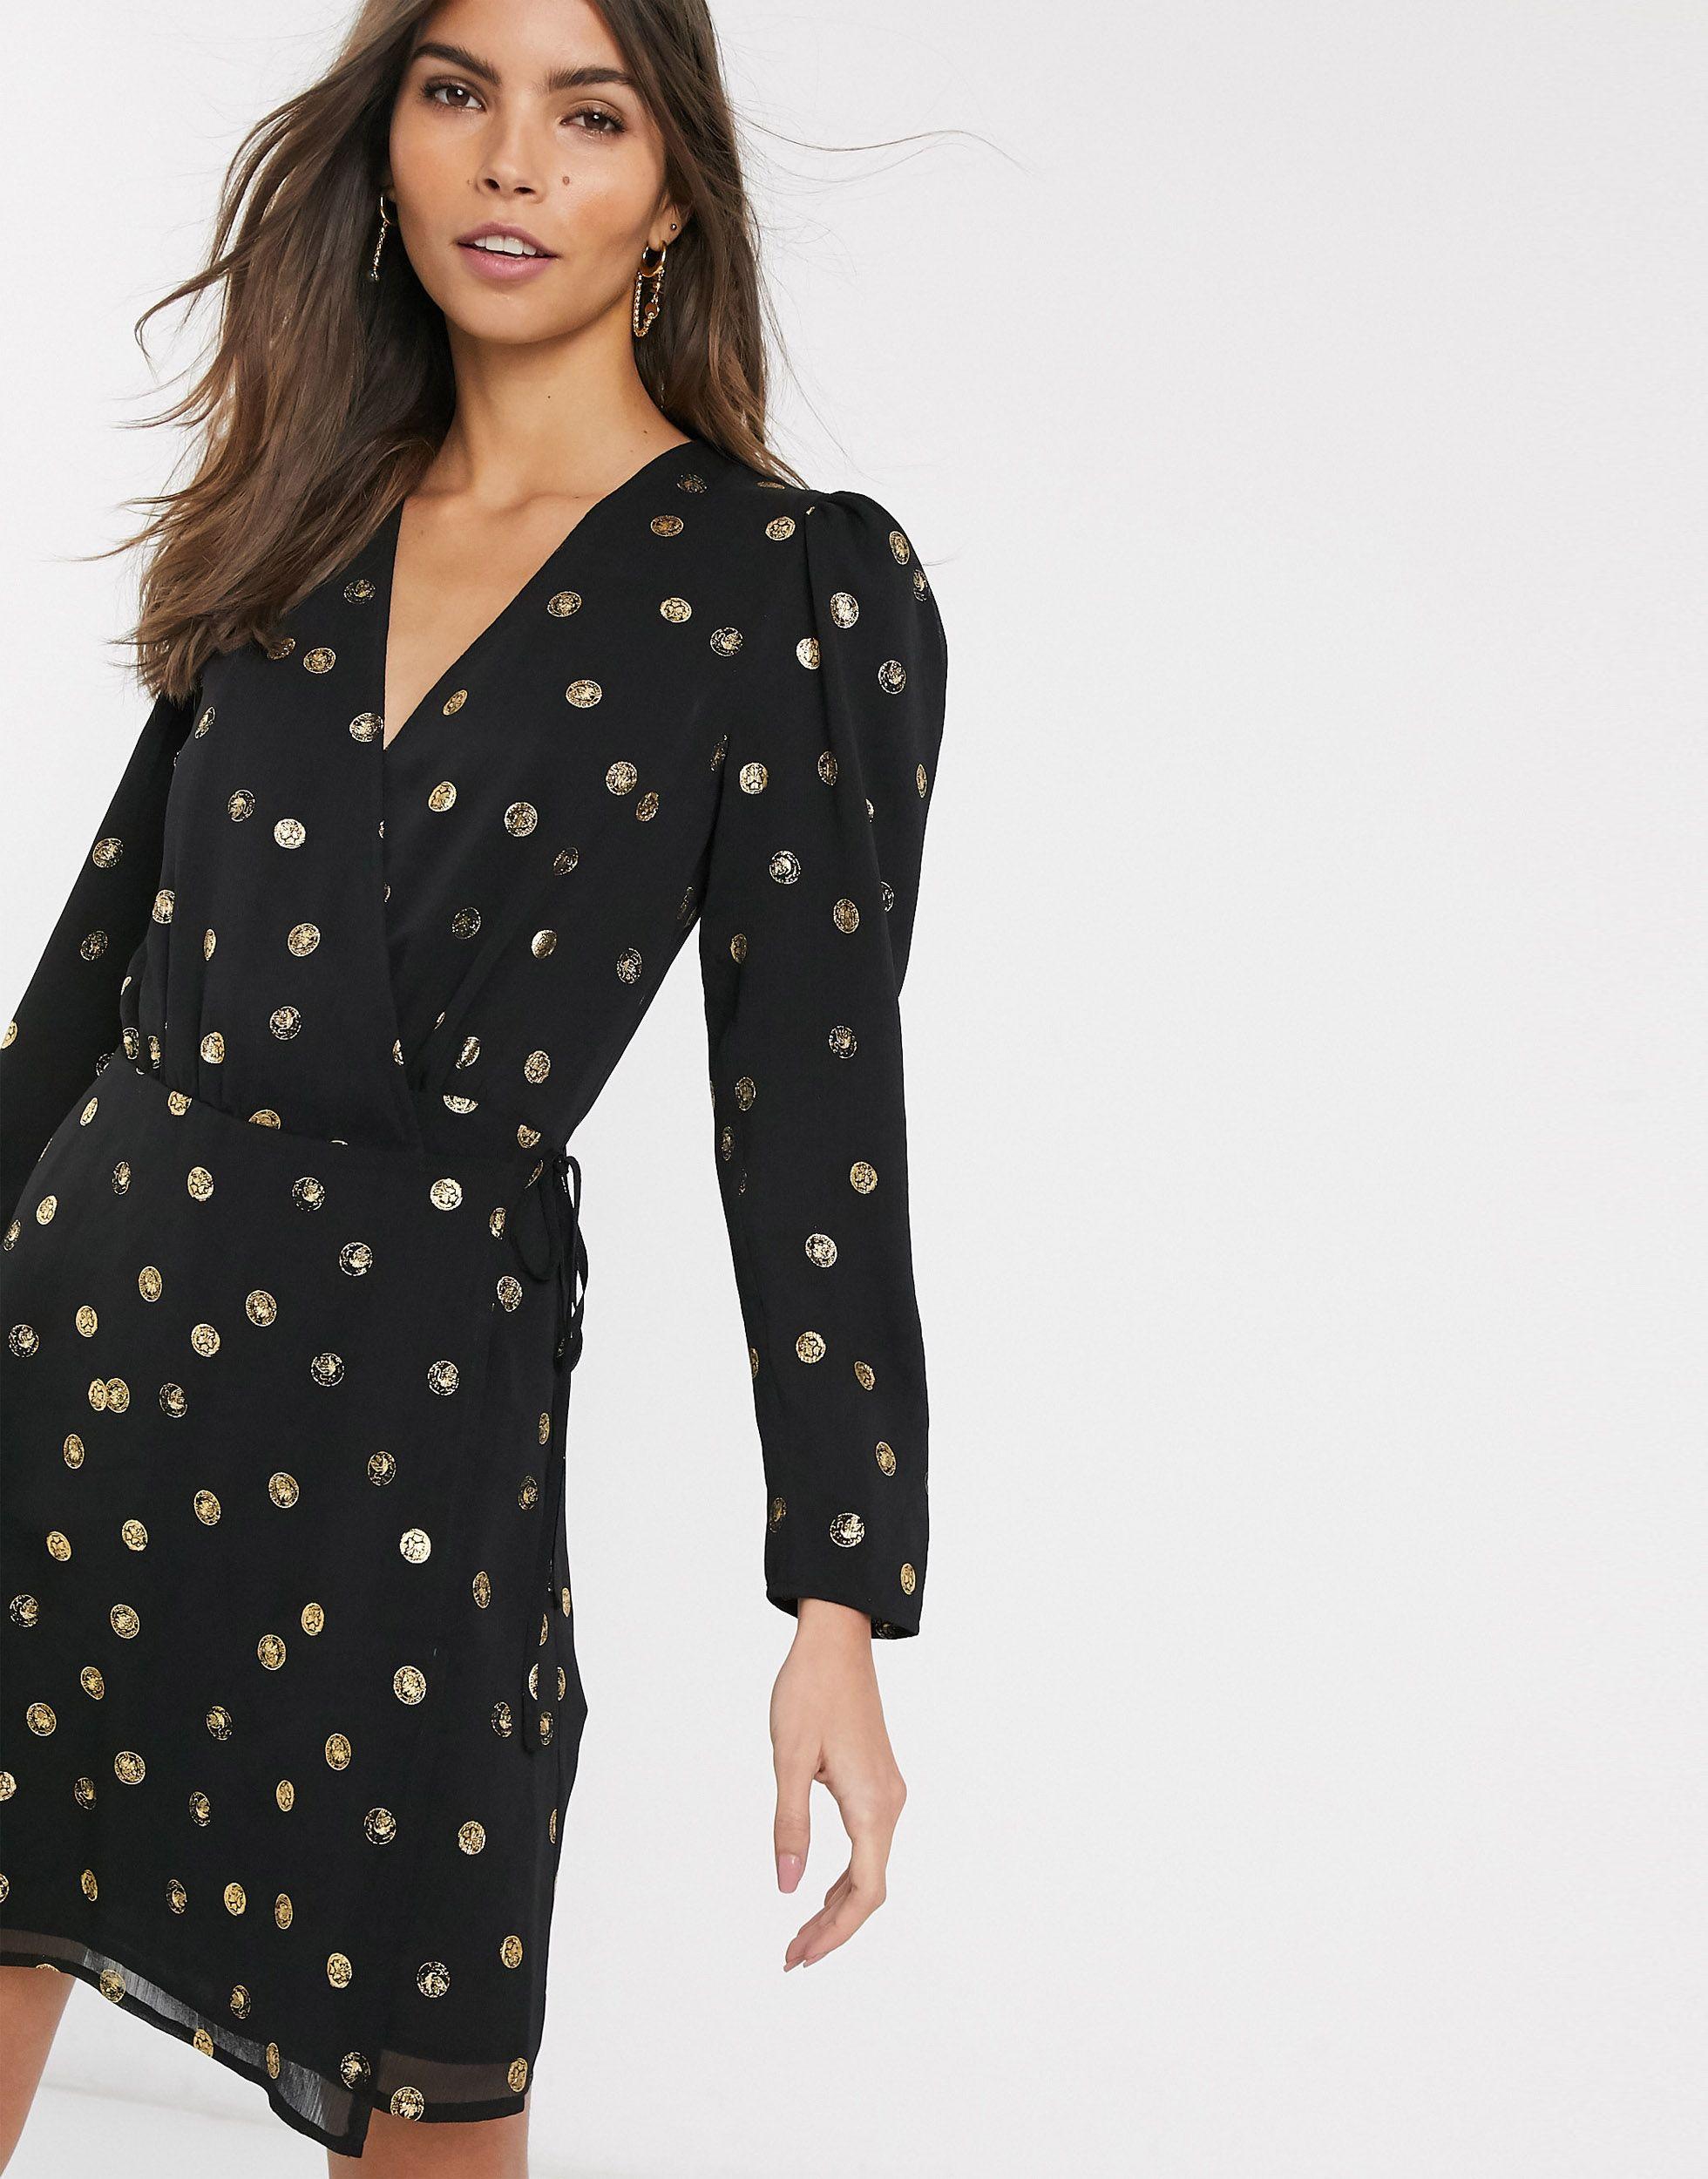 & Other Stories Mini Wrap Dress in Black - Lyst